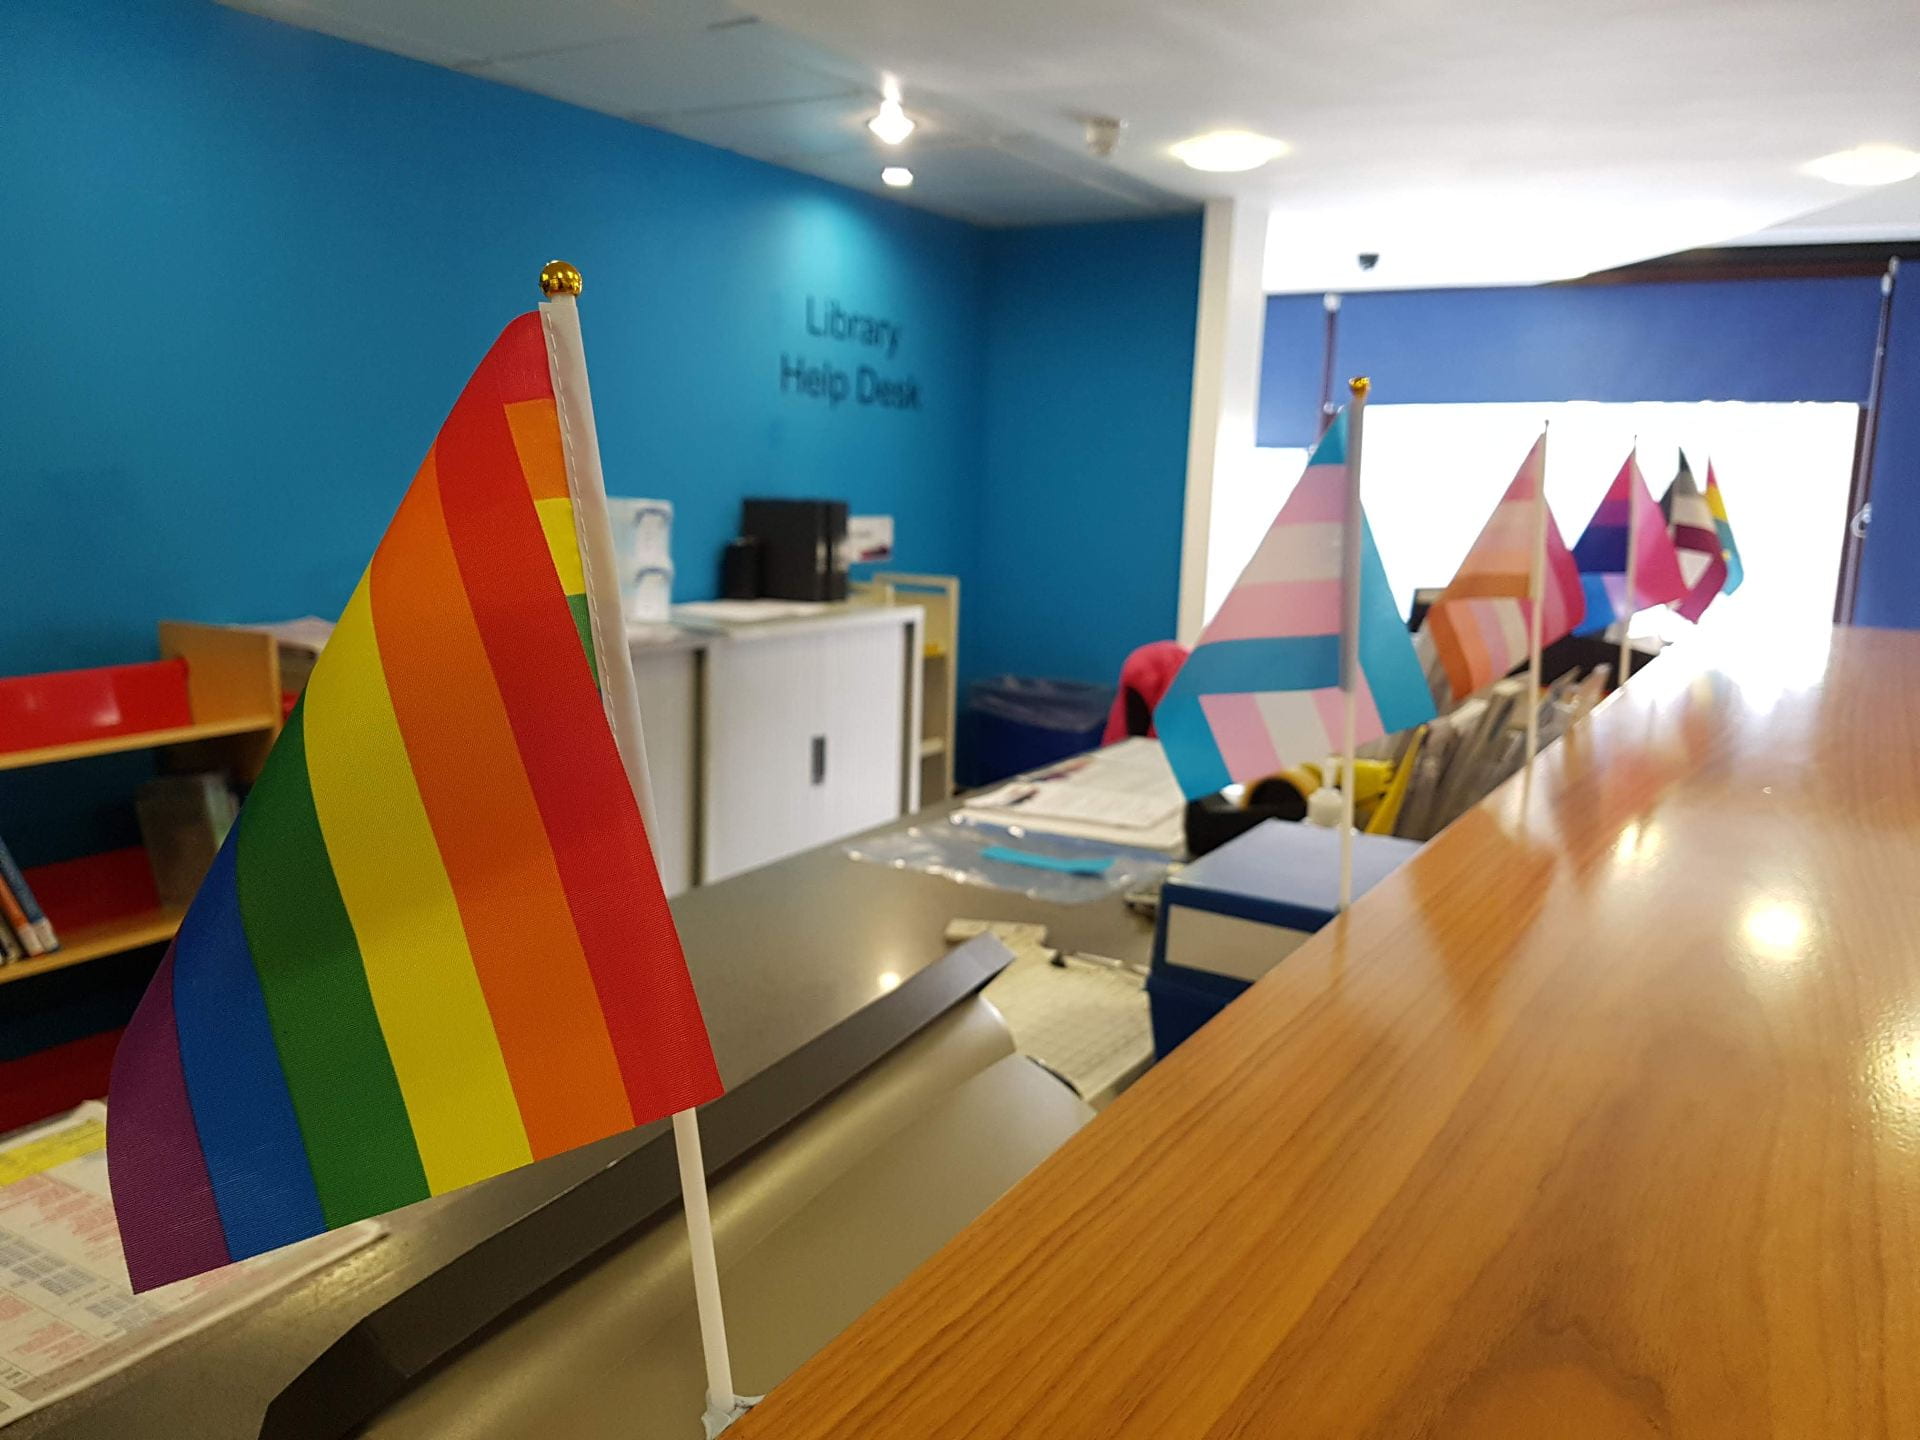 A picture of LGBT flags on Library Help desk